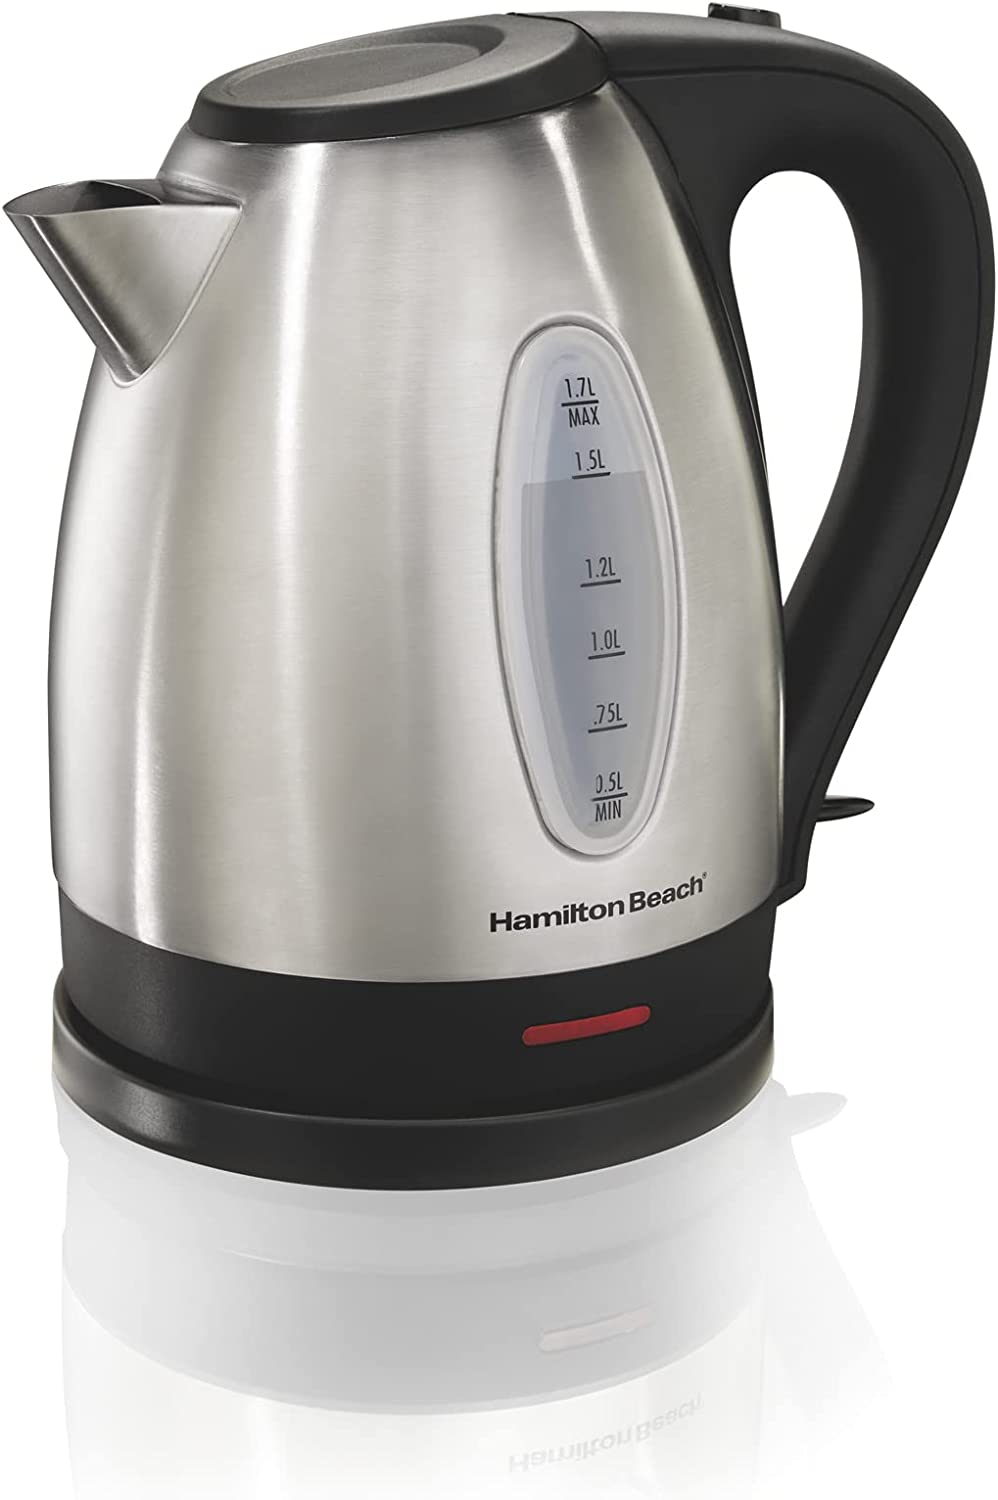 https://discounttoday.net/wp-content/uploads/2022/11/Hamilton-Beach-Electric-Tea-Kettle-Water-Boiler-Heater-1.7-L-Cordless-Auto-Shutoff-and-Boil-Dry-Protection-Stainless-Steel-40880.jpg